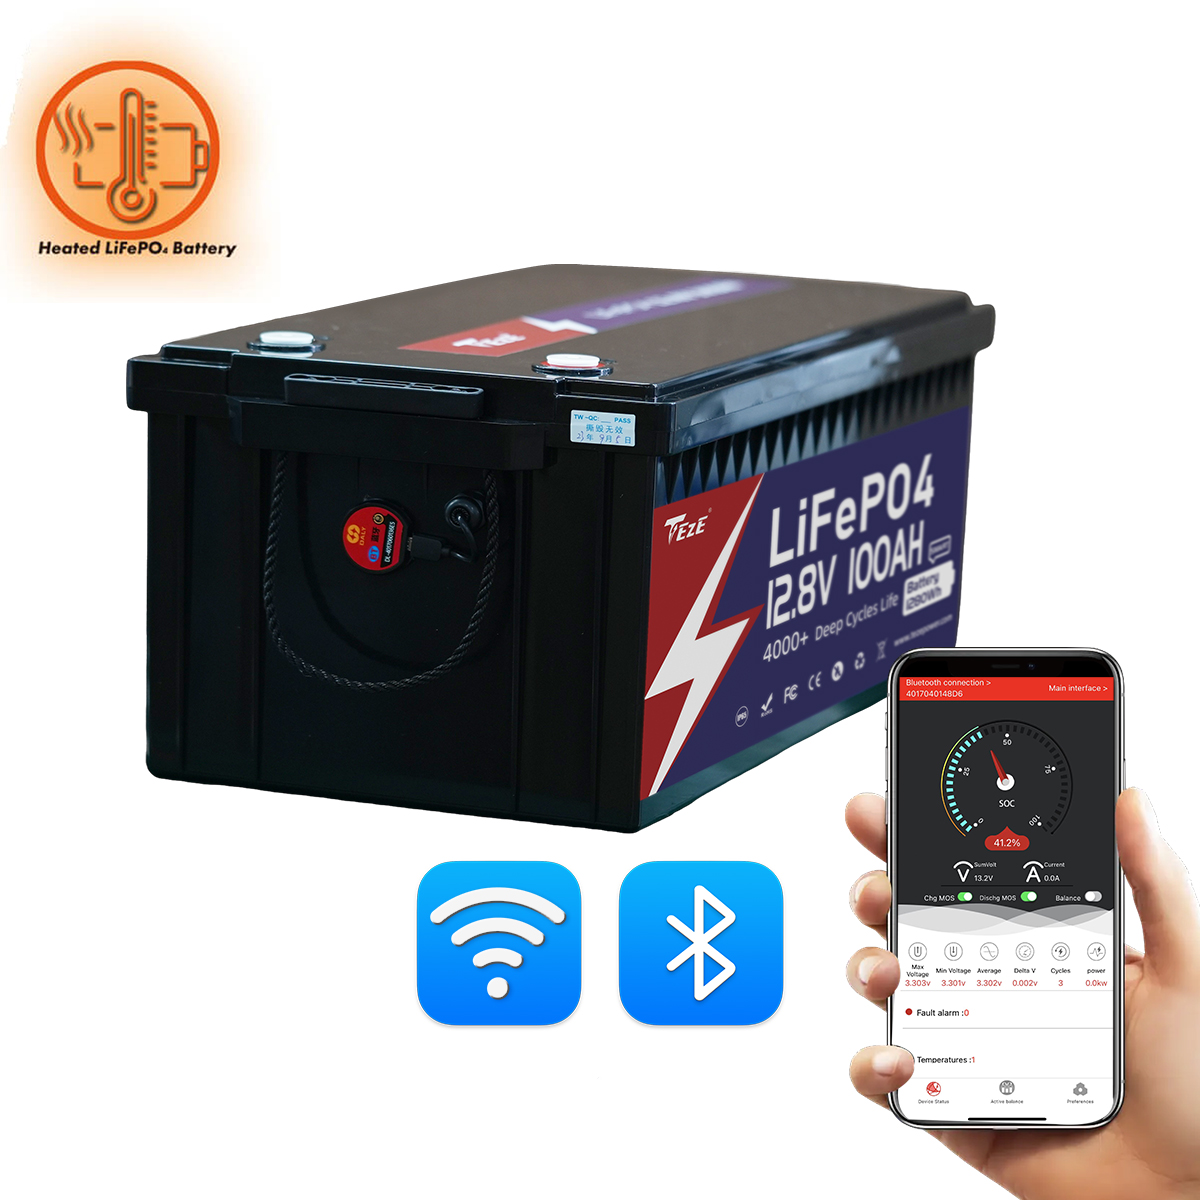 New Add WiFi-TezePower 12V 100Ah LiFePO4 Battery with WiFi and Bluetooth, Self-heating and Active Balancer, Built-in 100A Daly BMS(WiFi External Version)-TezePower